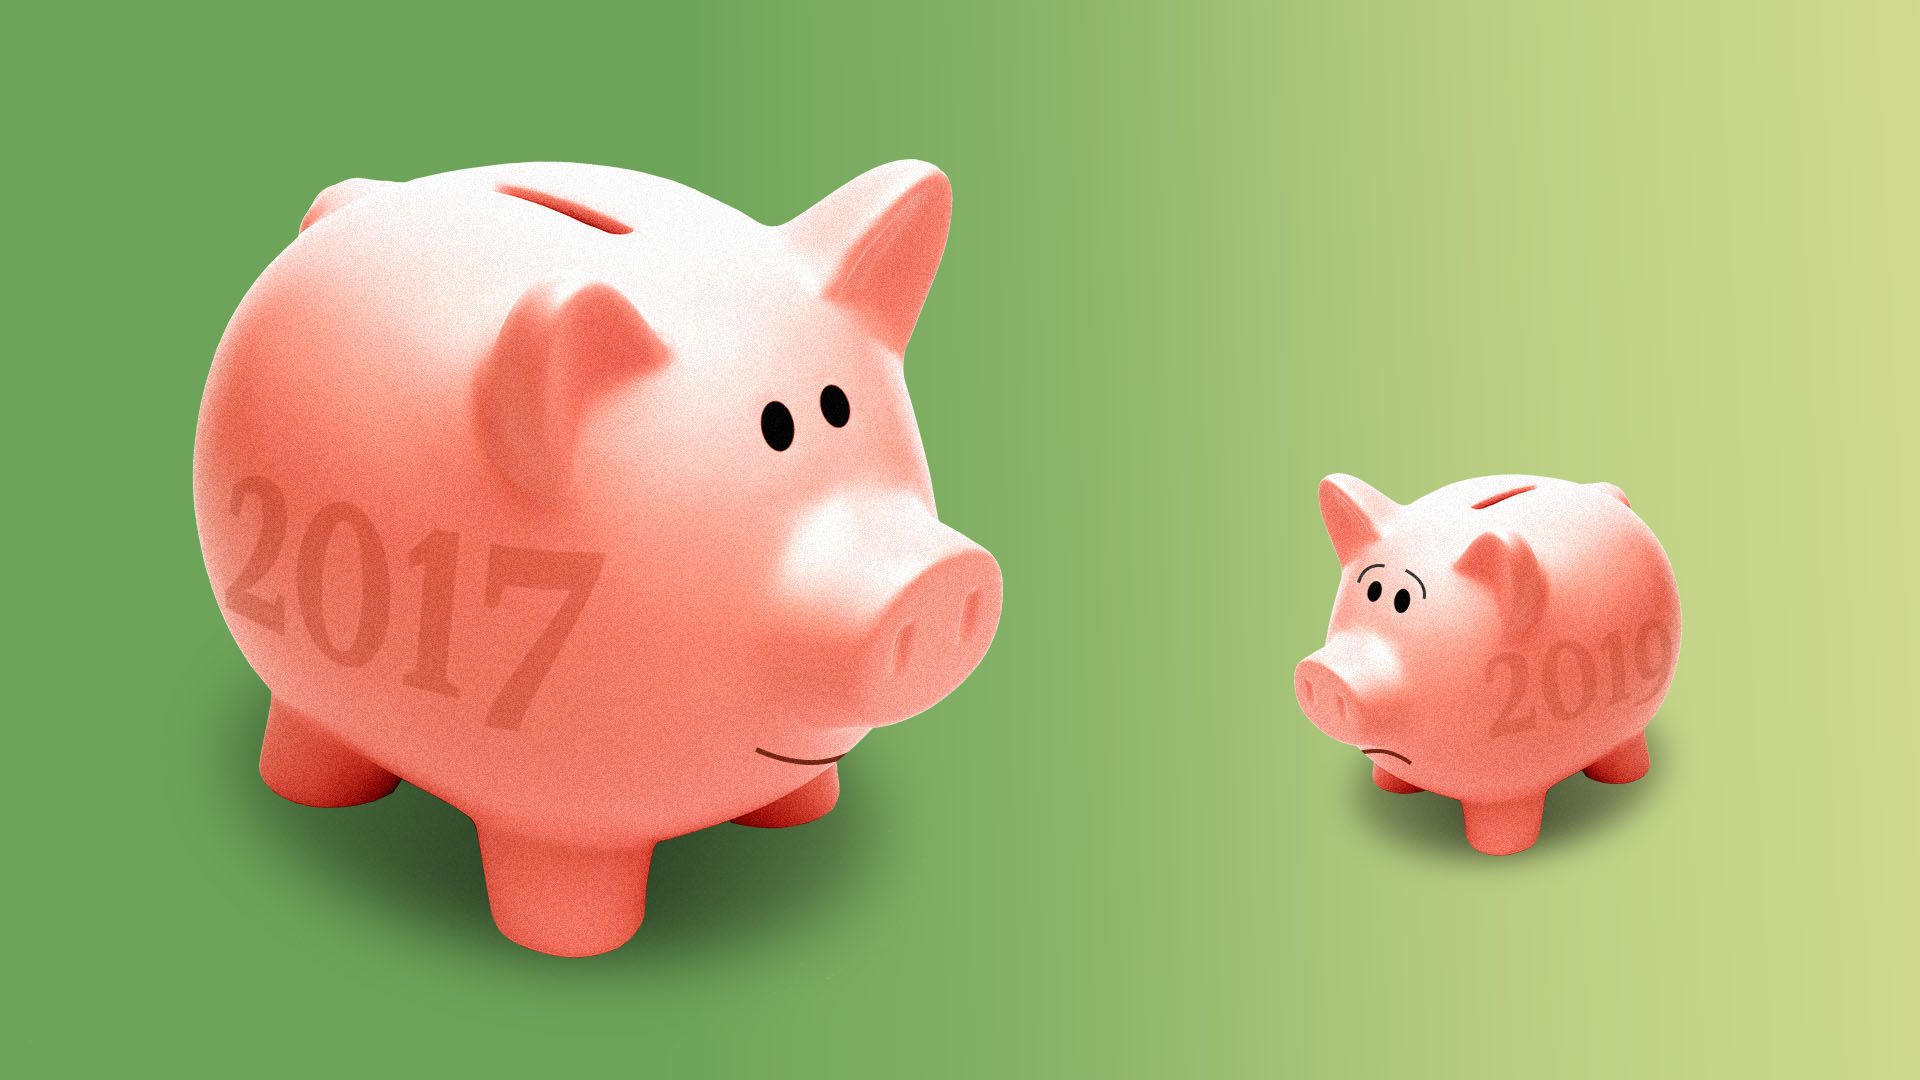  Illustration of a big smiling piggy bank that says "2017" on the side, and a smaller, worried-looking piggy bank that reads "2019."